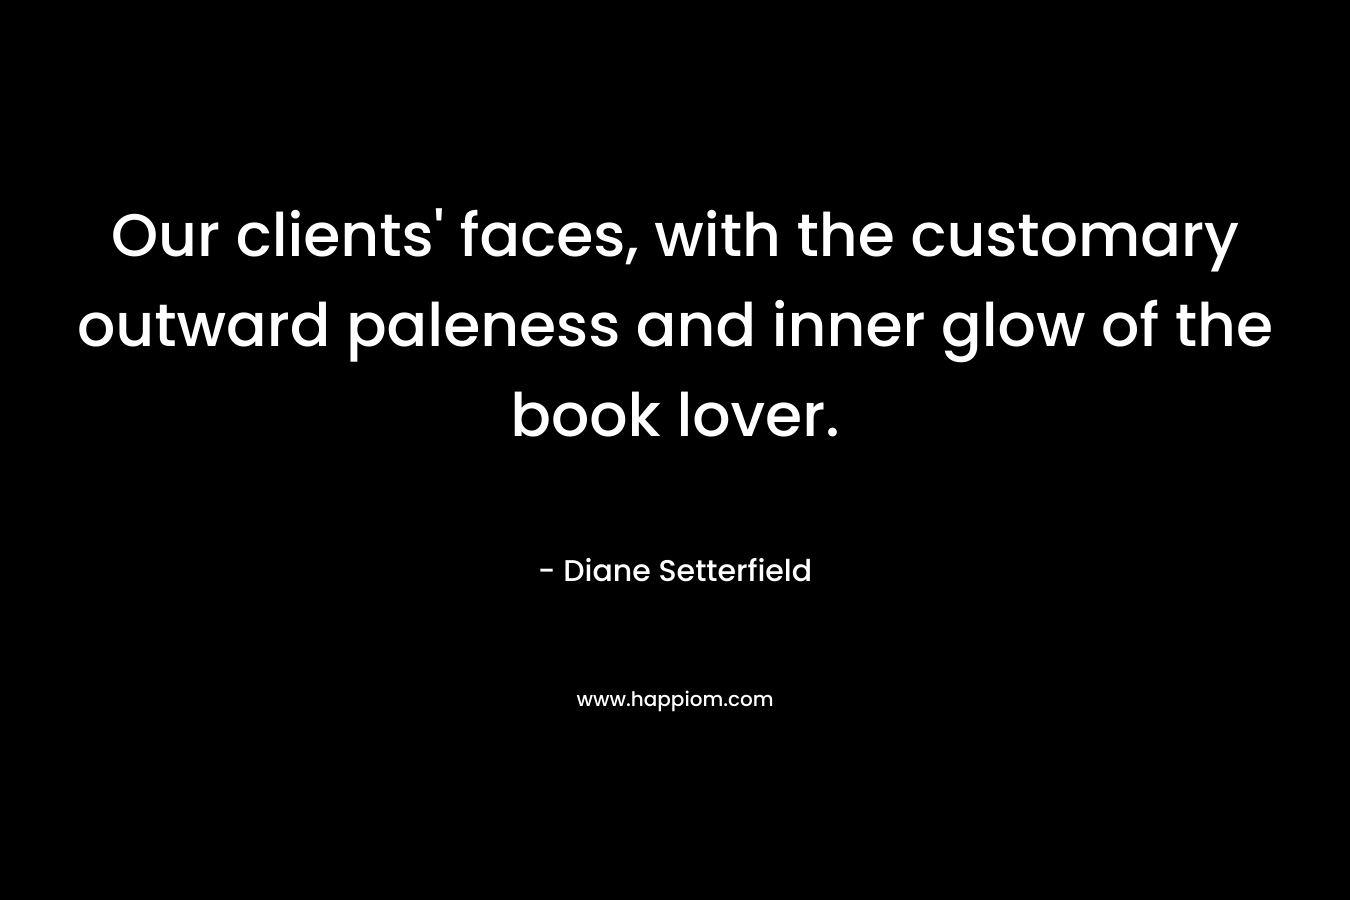 Our clients' faces, with the customary outward paleness and inner glow of the book lover.